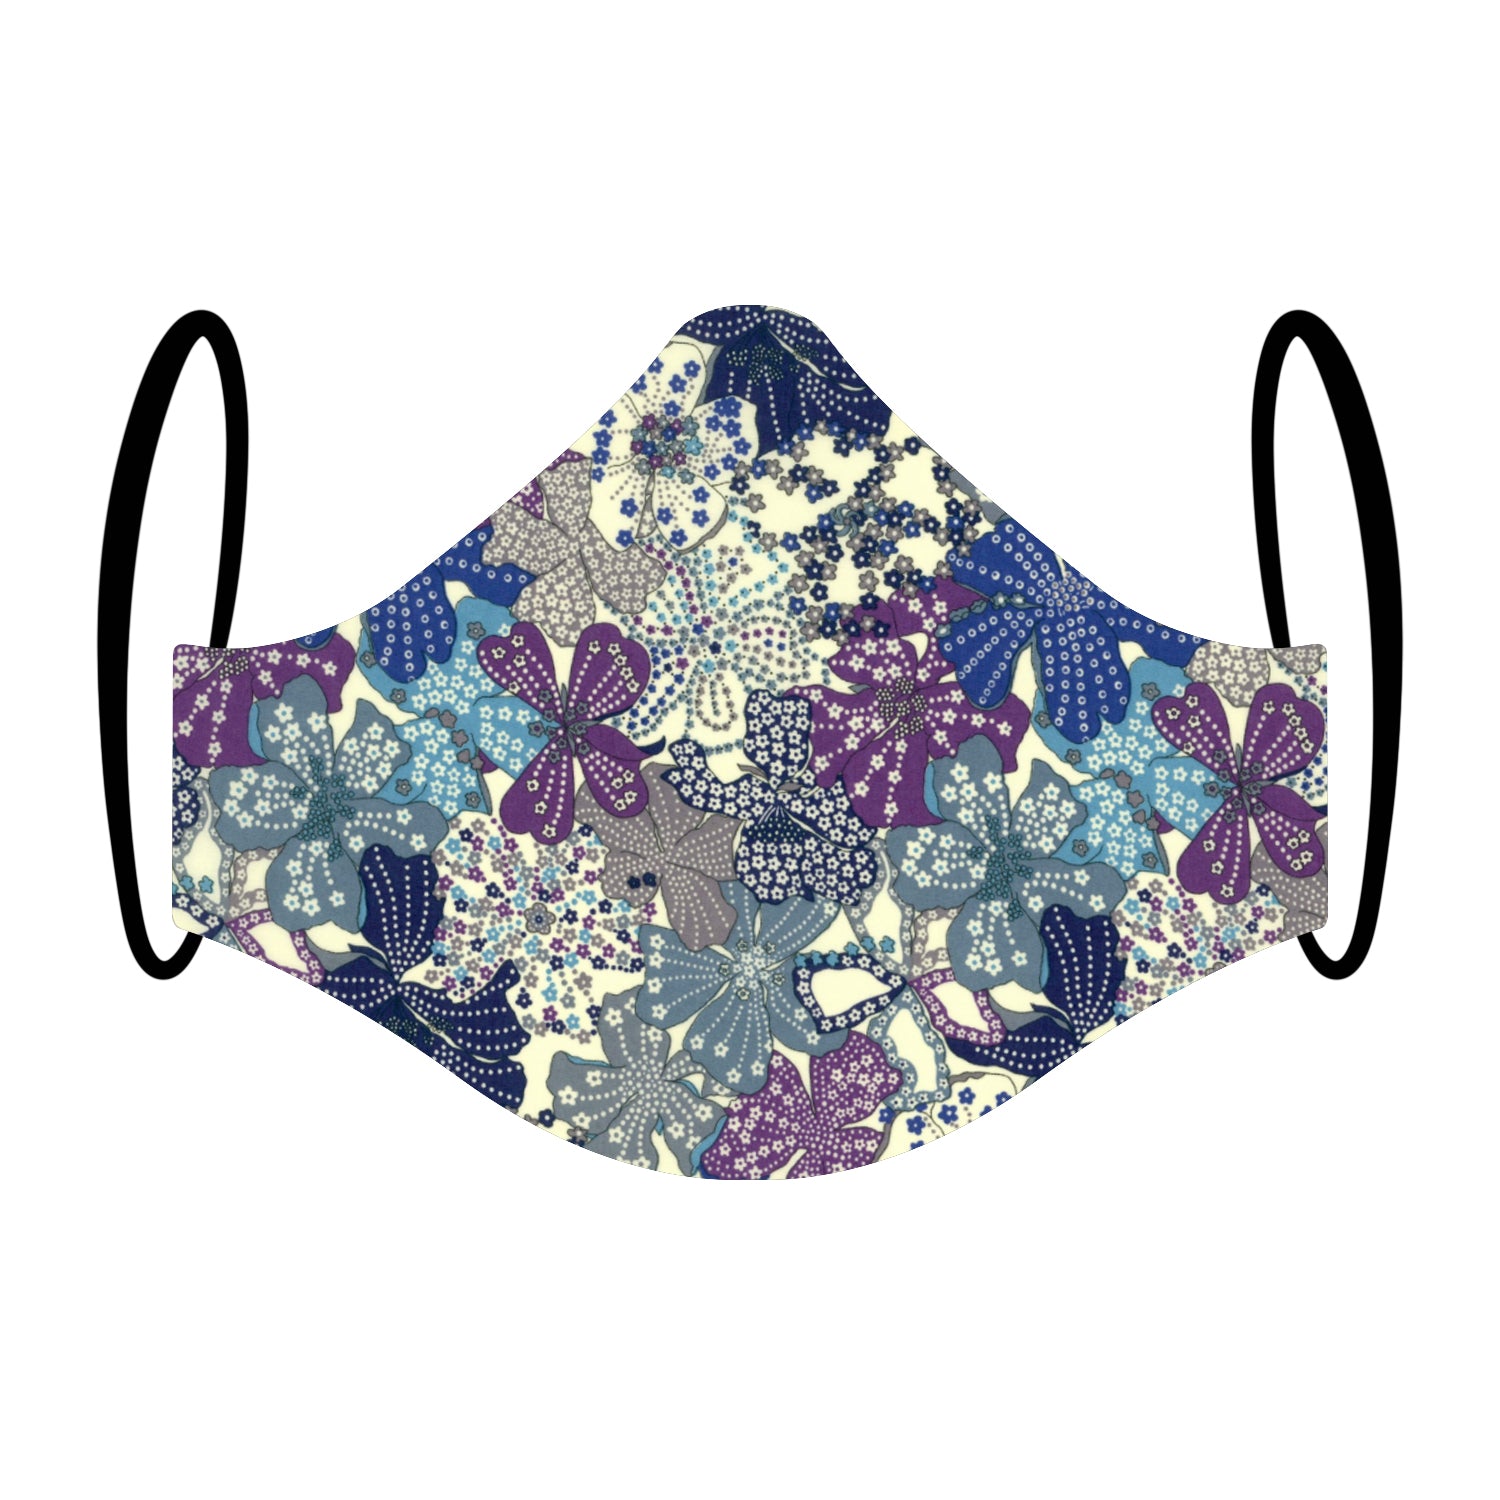 "Iso Indigo" Premium Purpley Face Mask featuring Liberty London Fabric Triple-layer Washable {Limited Edition}